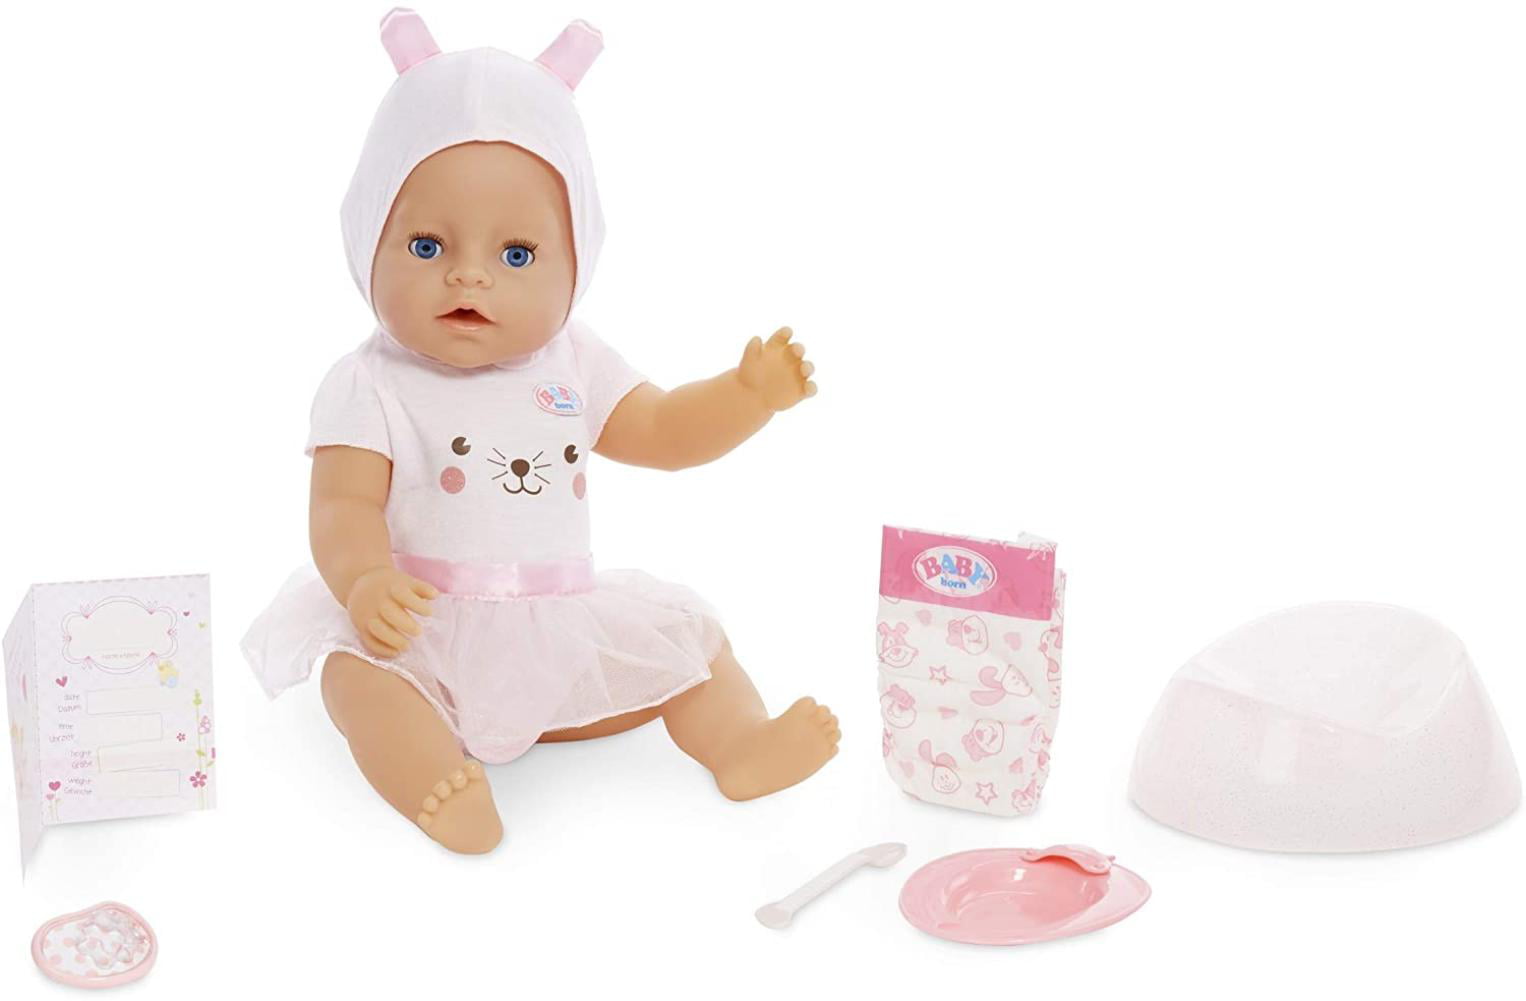 Baby Born Interactive Dolls with Accessories & Lifelike Functions Crib Play Set